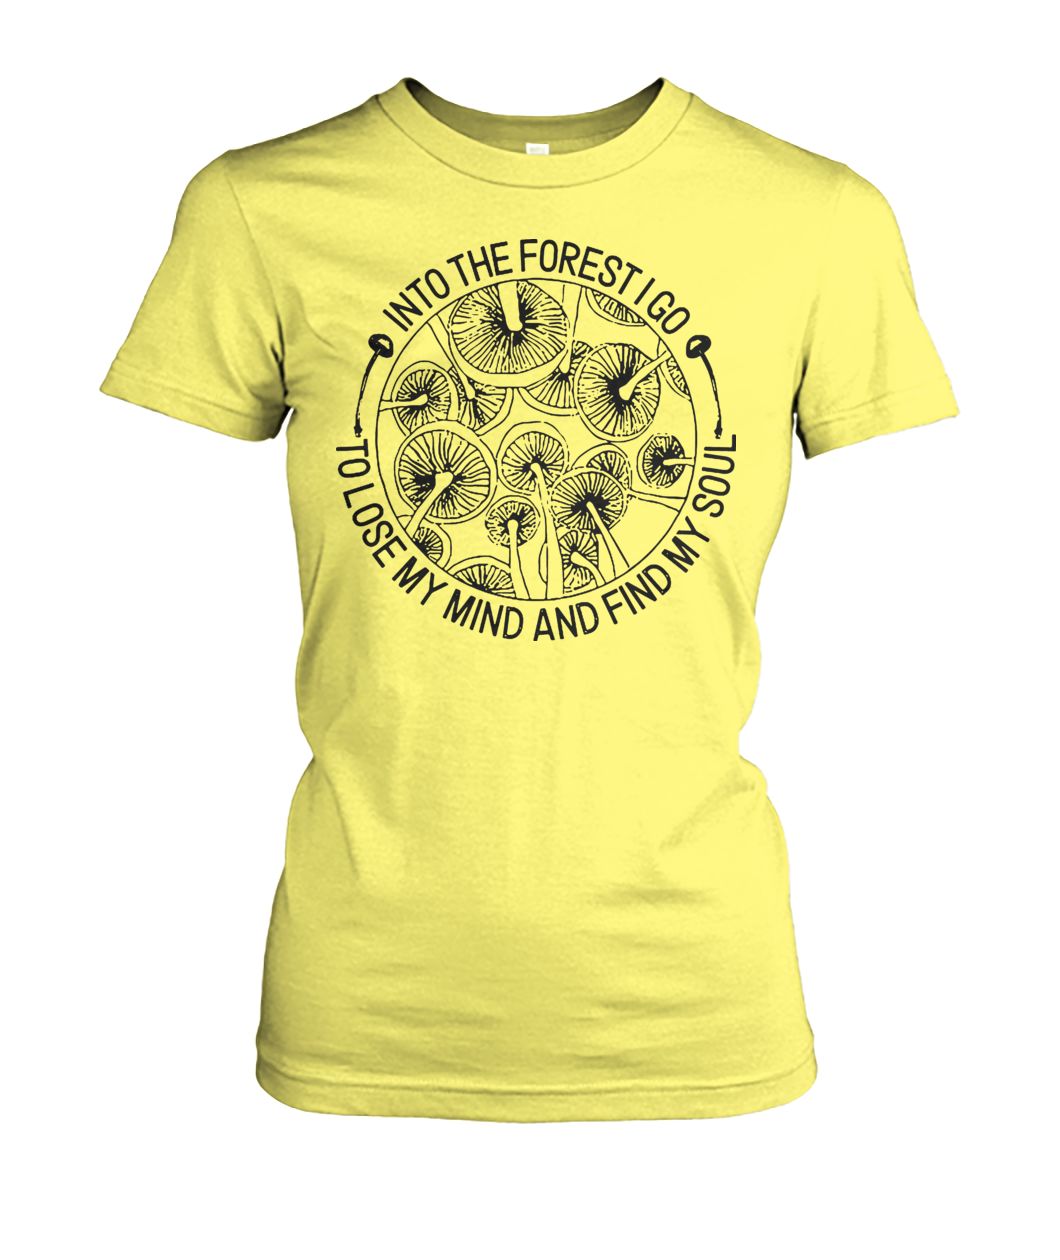 Mushroom into the forest I go to lose my mind and find my soul women's crew tee